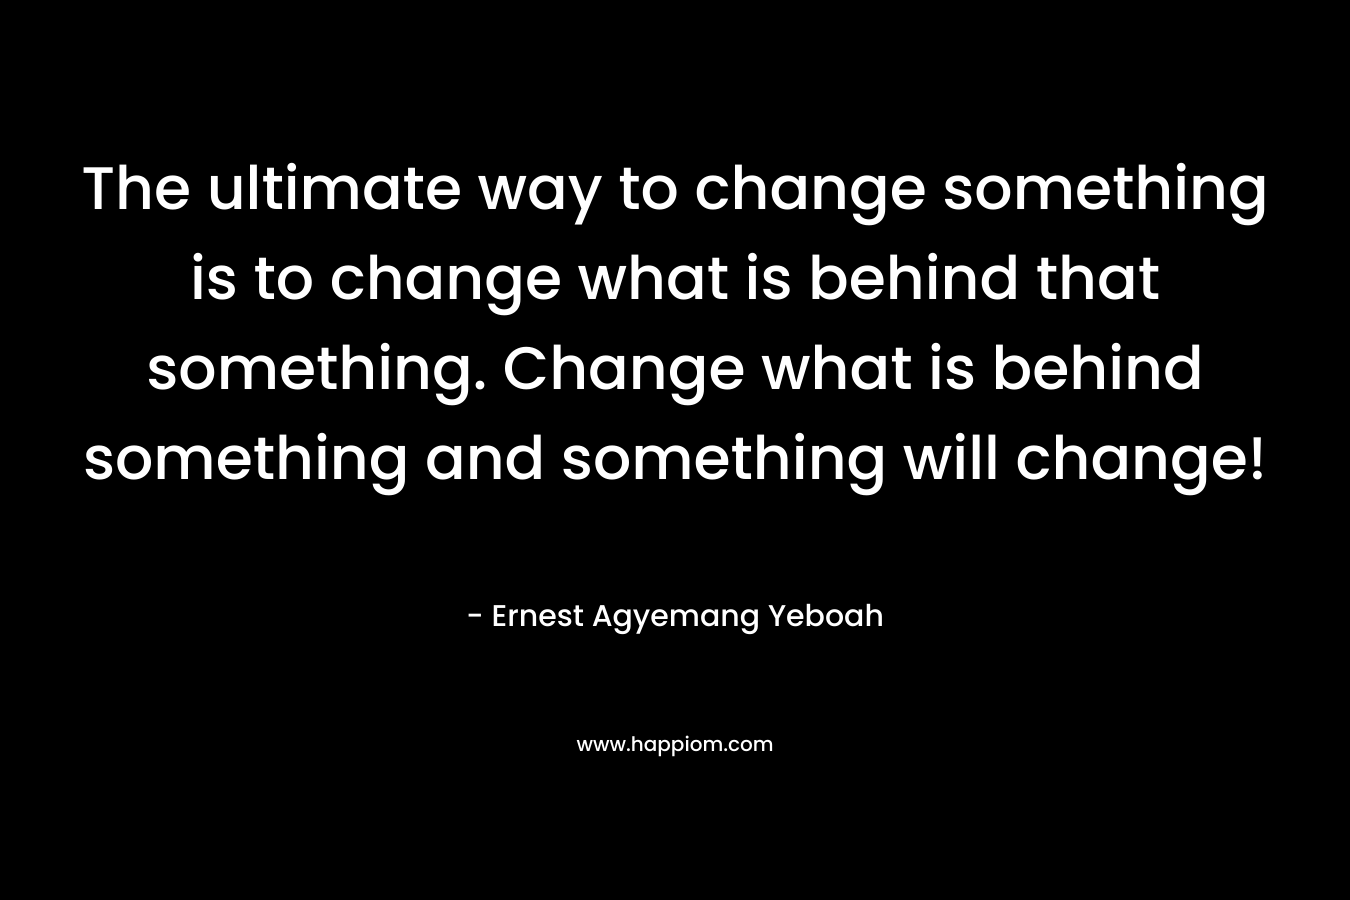 The ultimate way to change something is to change what is behind that something. Change what is behind something and something will change!